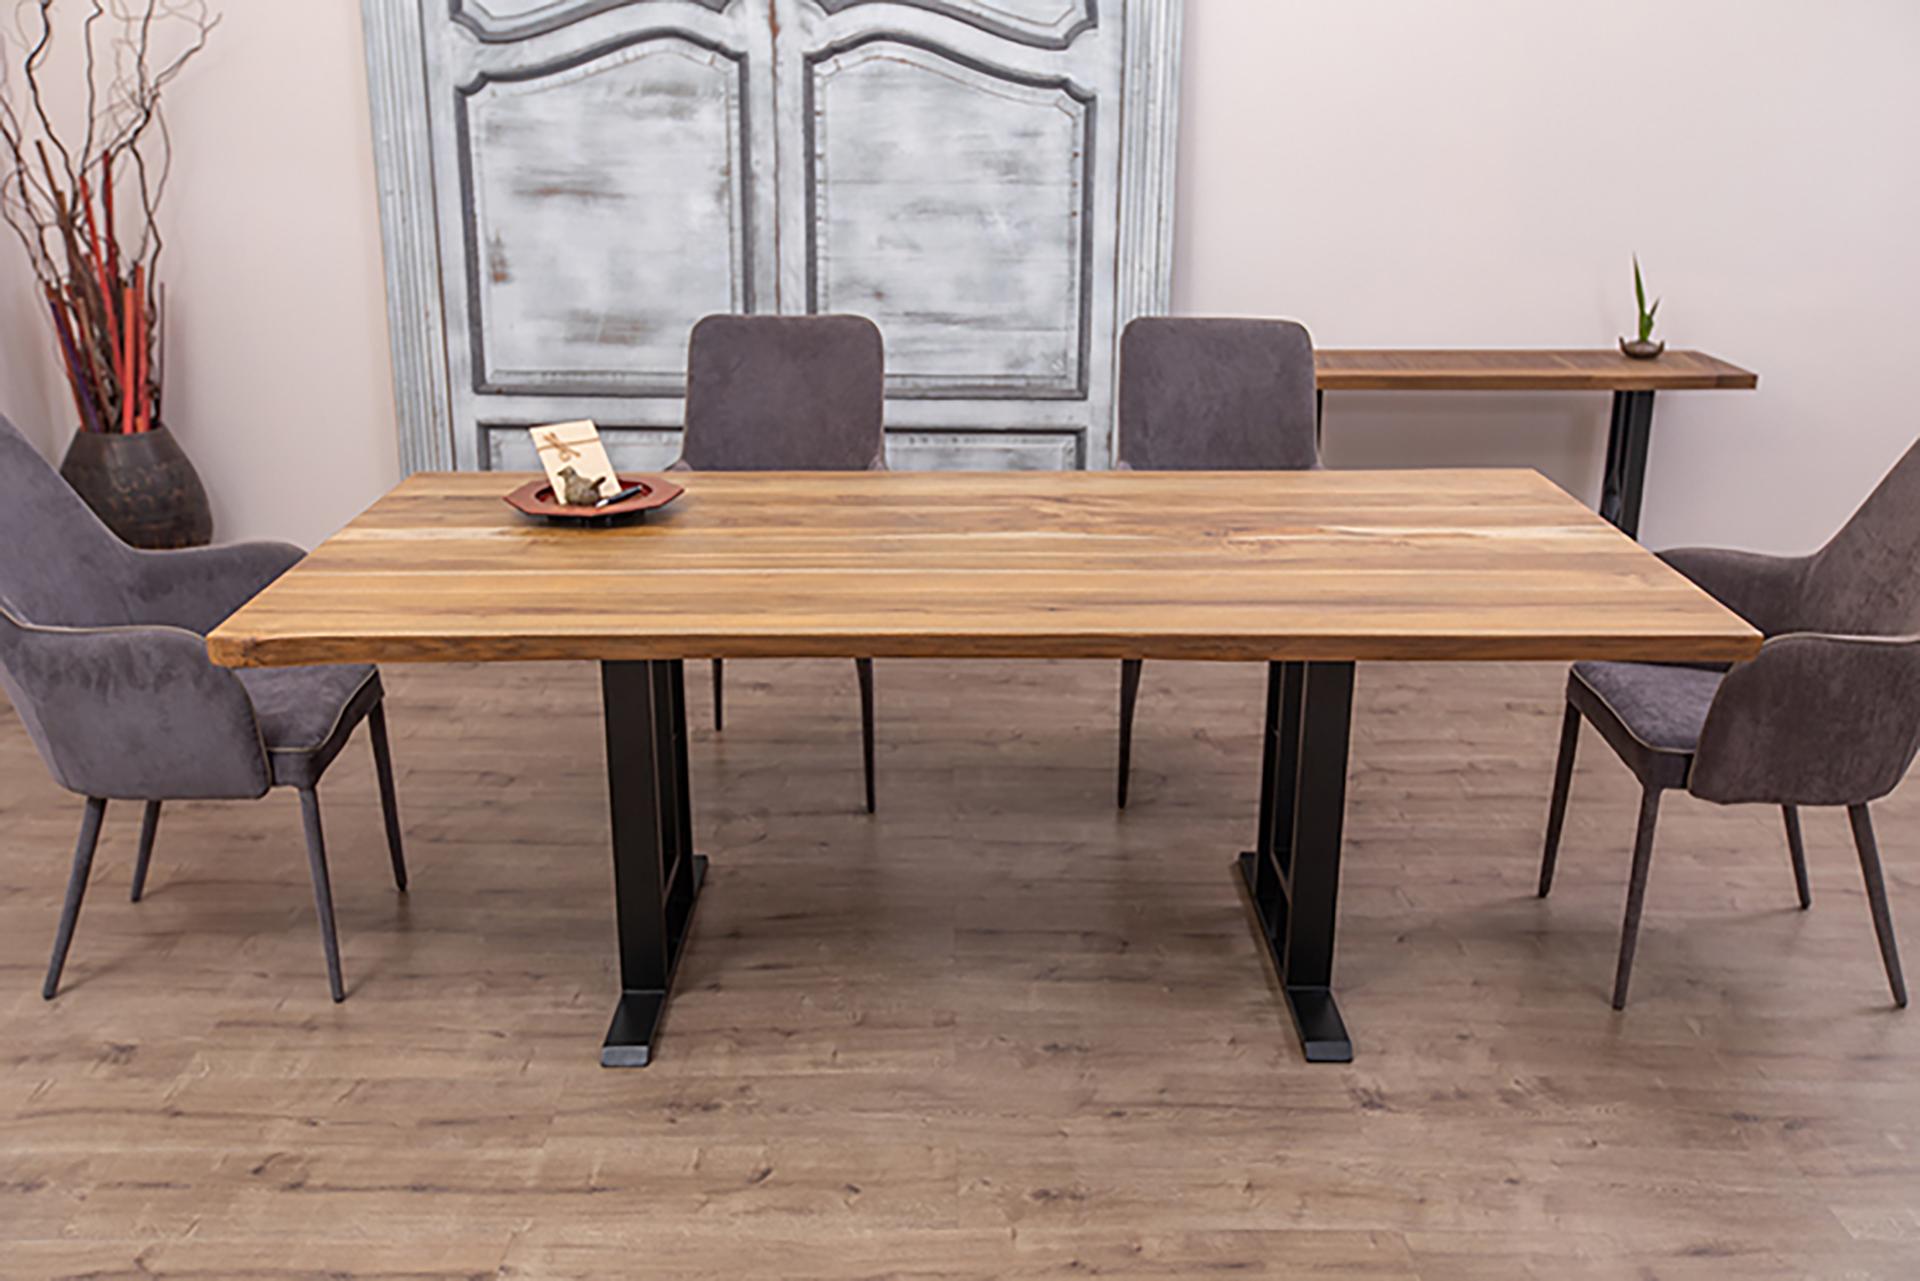 A gorgeous dining table that provides a lovely foundation for family dinners. Using century-old joinery techniques, the 100% solid natural wood table provides a focal piece that can be handed down for generations.

The Table Company makes only